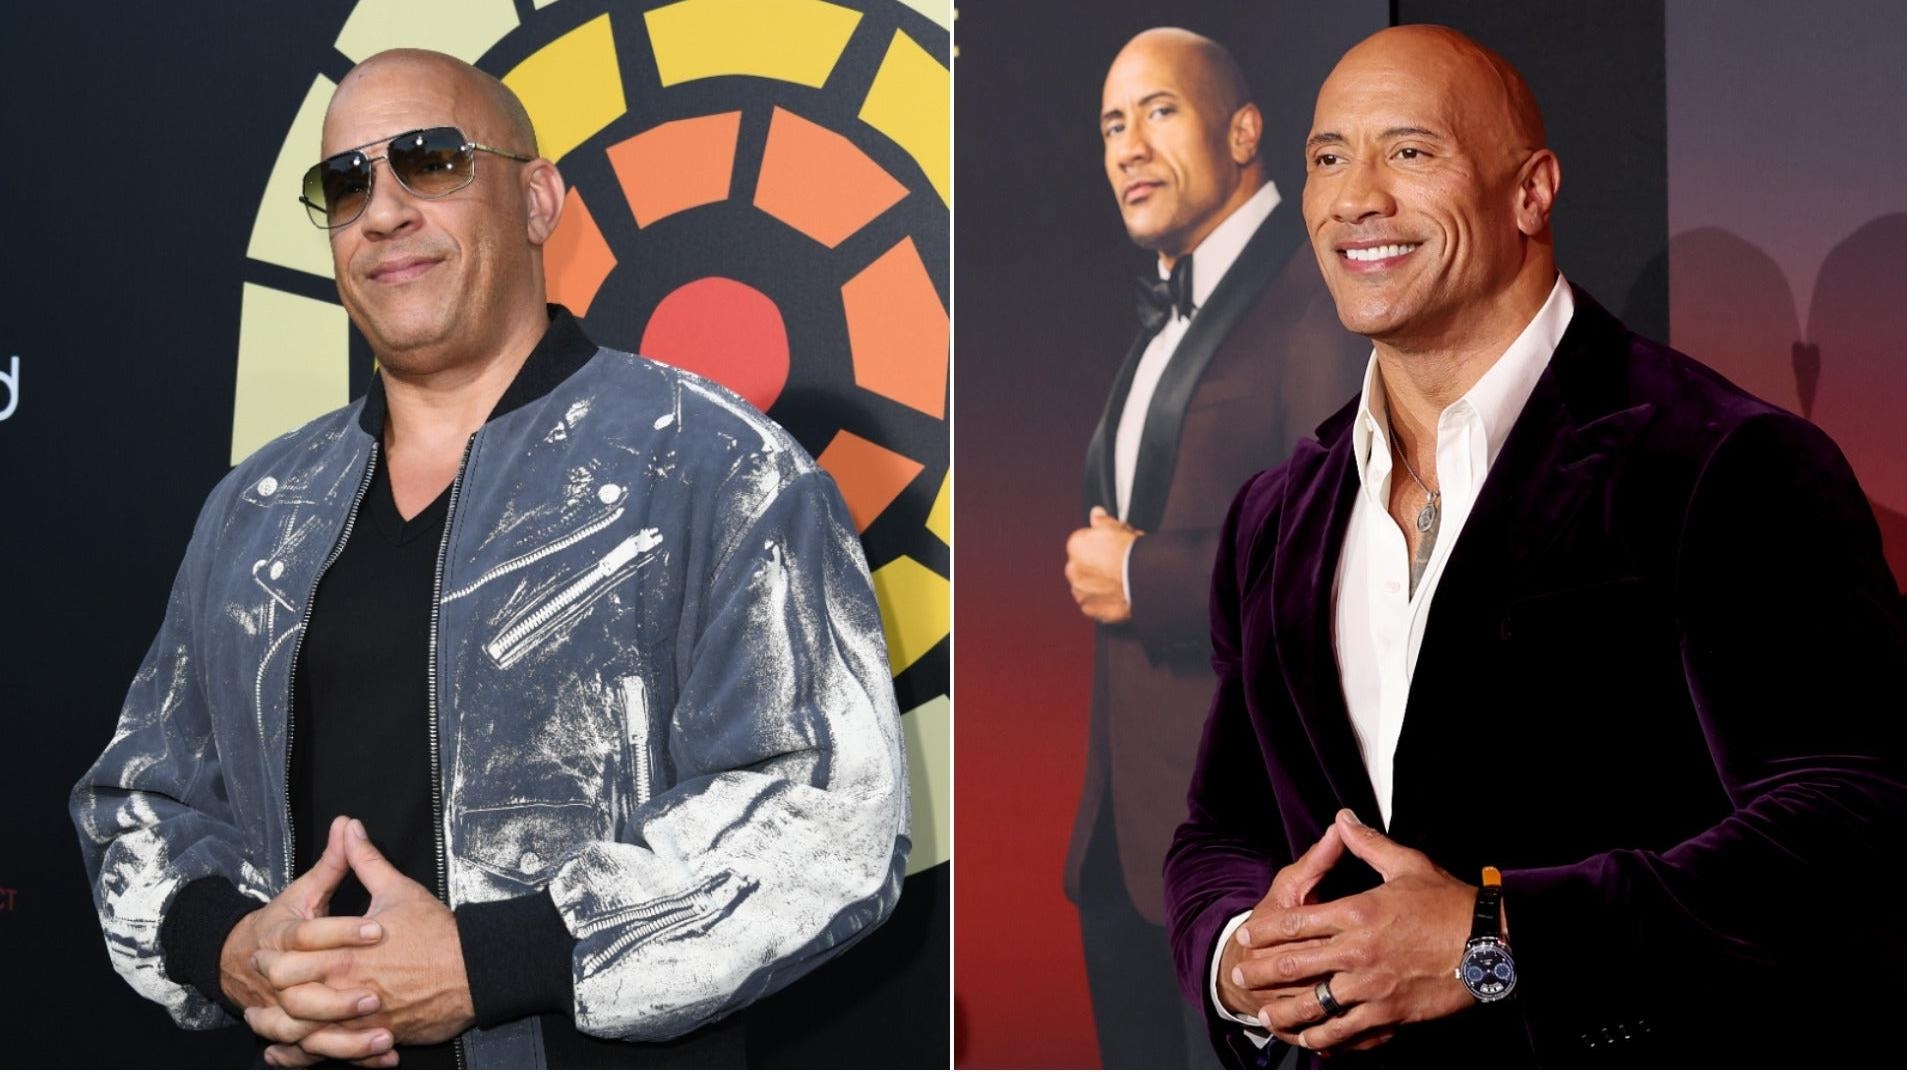 Vin Diesel asks “little brother” Dwayne Johnson to come back to Fast And Furious